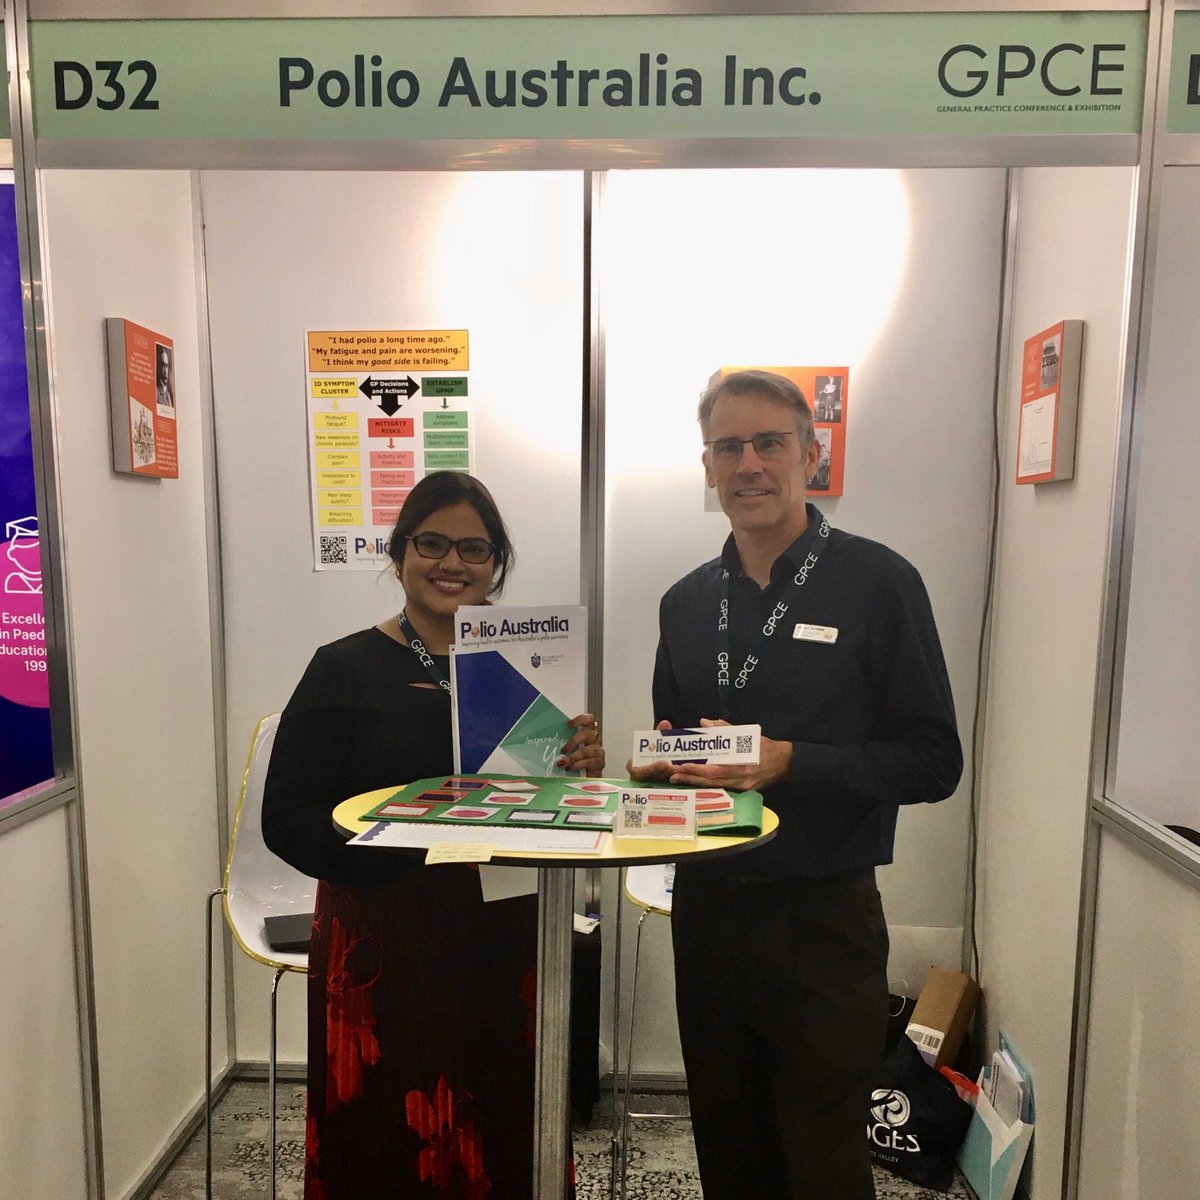 Devalina & Michael attended the General Practice Conference & Exhibition (#GPCE) in #Sydney. One of our top priorities is to educate #clinicians on how diagnose & manage post-polio conditions. #postpolio #polioawareness #lateeffectsofpolio #clinicaleducation #generalpractitioner